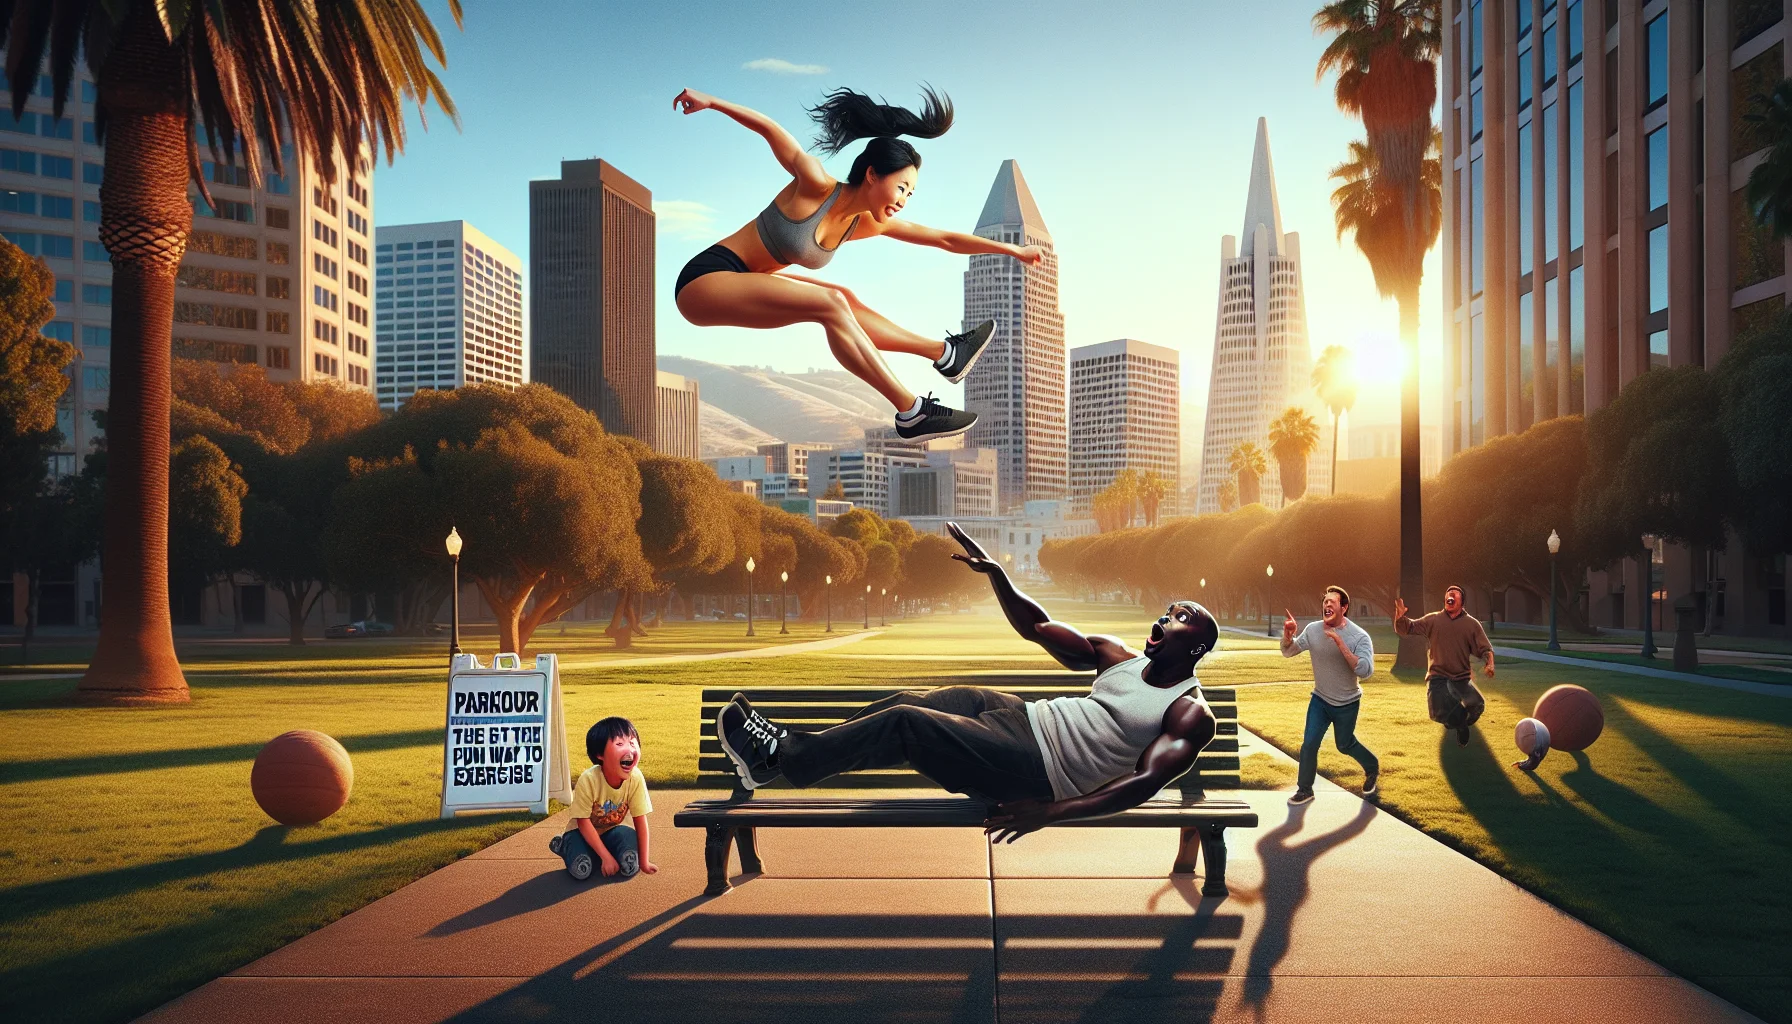 Generate a humorous, realistic image that promotes physical fitness through parkour. Picture a sunlit cityscape of San Jose, with its iconic skyscrapers, palm trees, and mountains visible in the background. In the foreground, a fit Asian female is seen vaulting over a park bench while an amused Black male tries to follow her example but ends up tripping over hilariously. Nearby, a laughing Middle-Eastern child points to a sign that says, 'Parkour: The Fun Way to Exercise'. The mood is light-hearted and signifies the joy and excitement of physical activity.